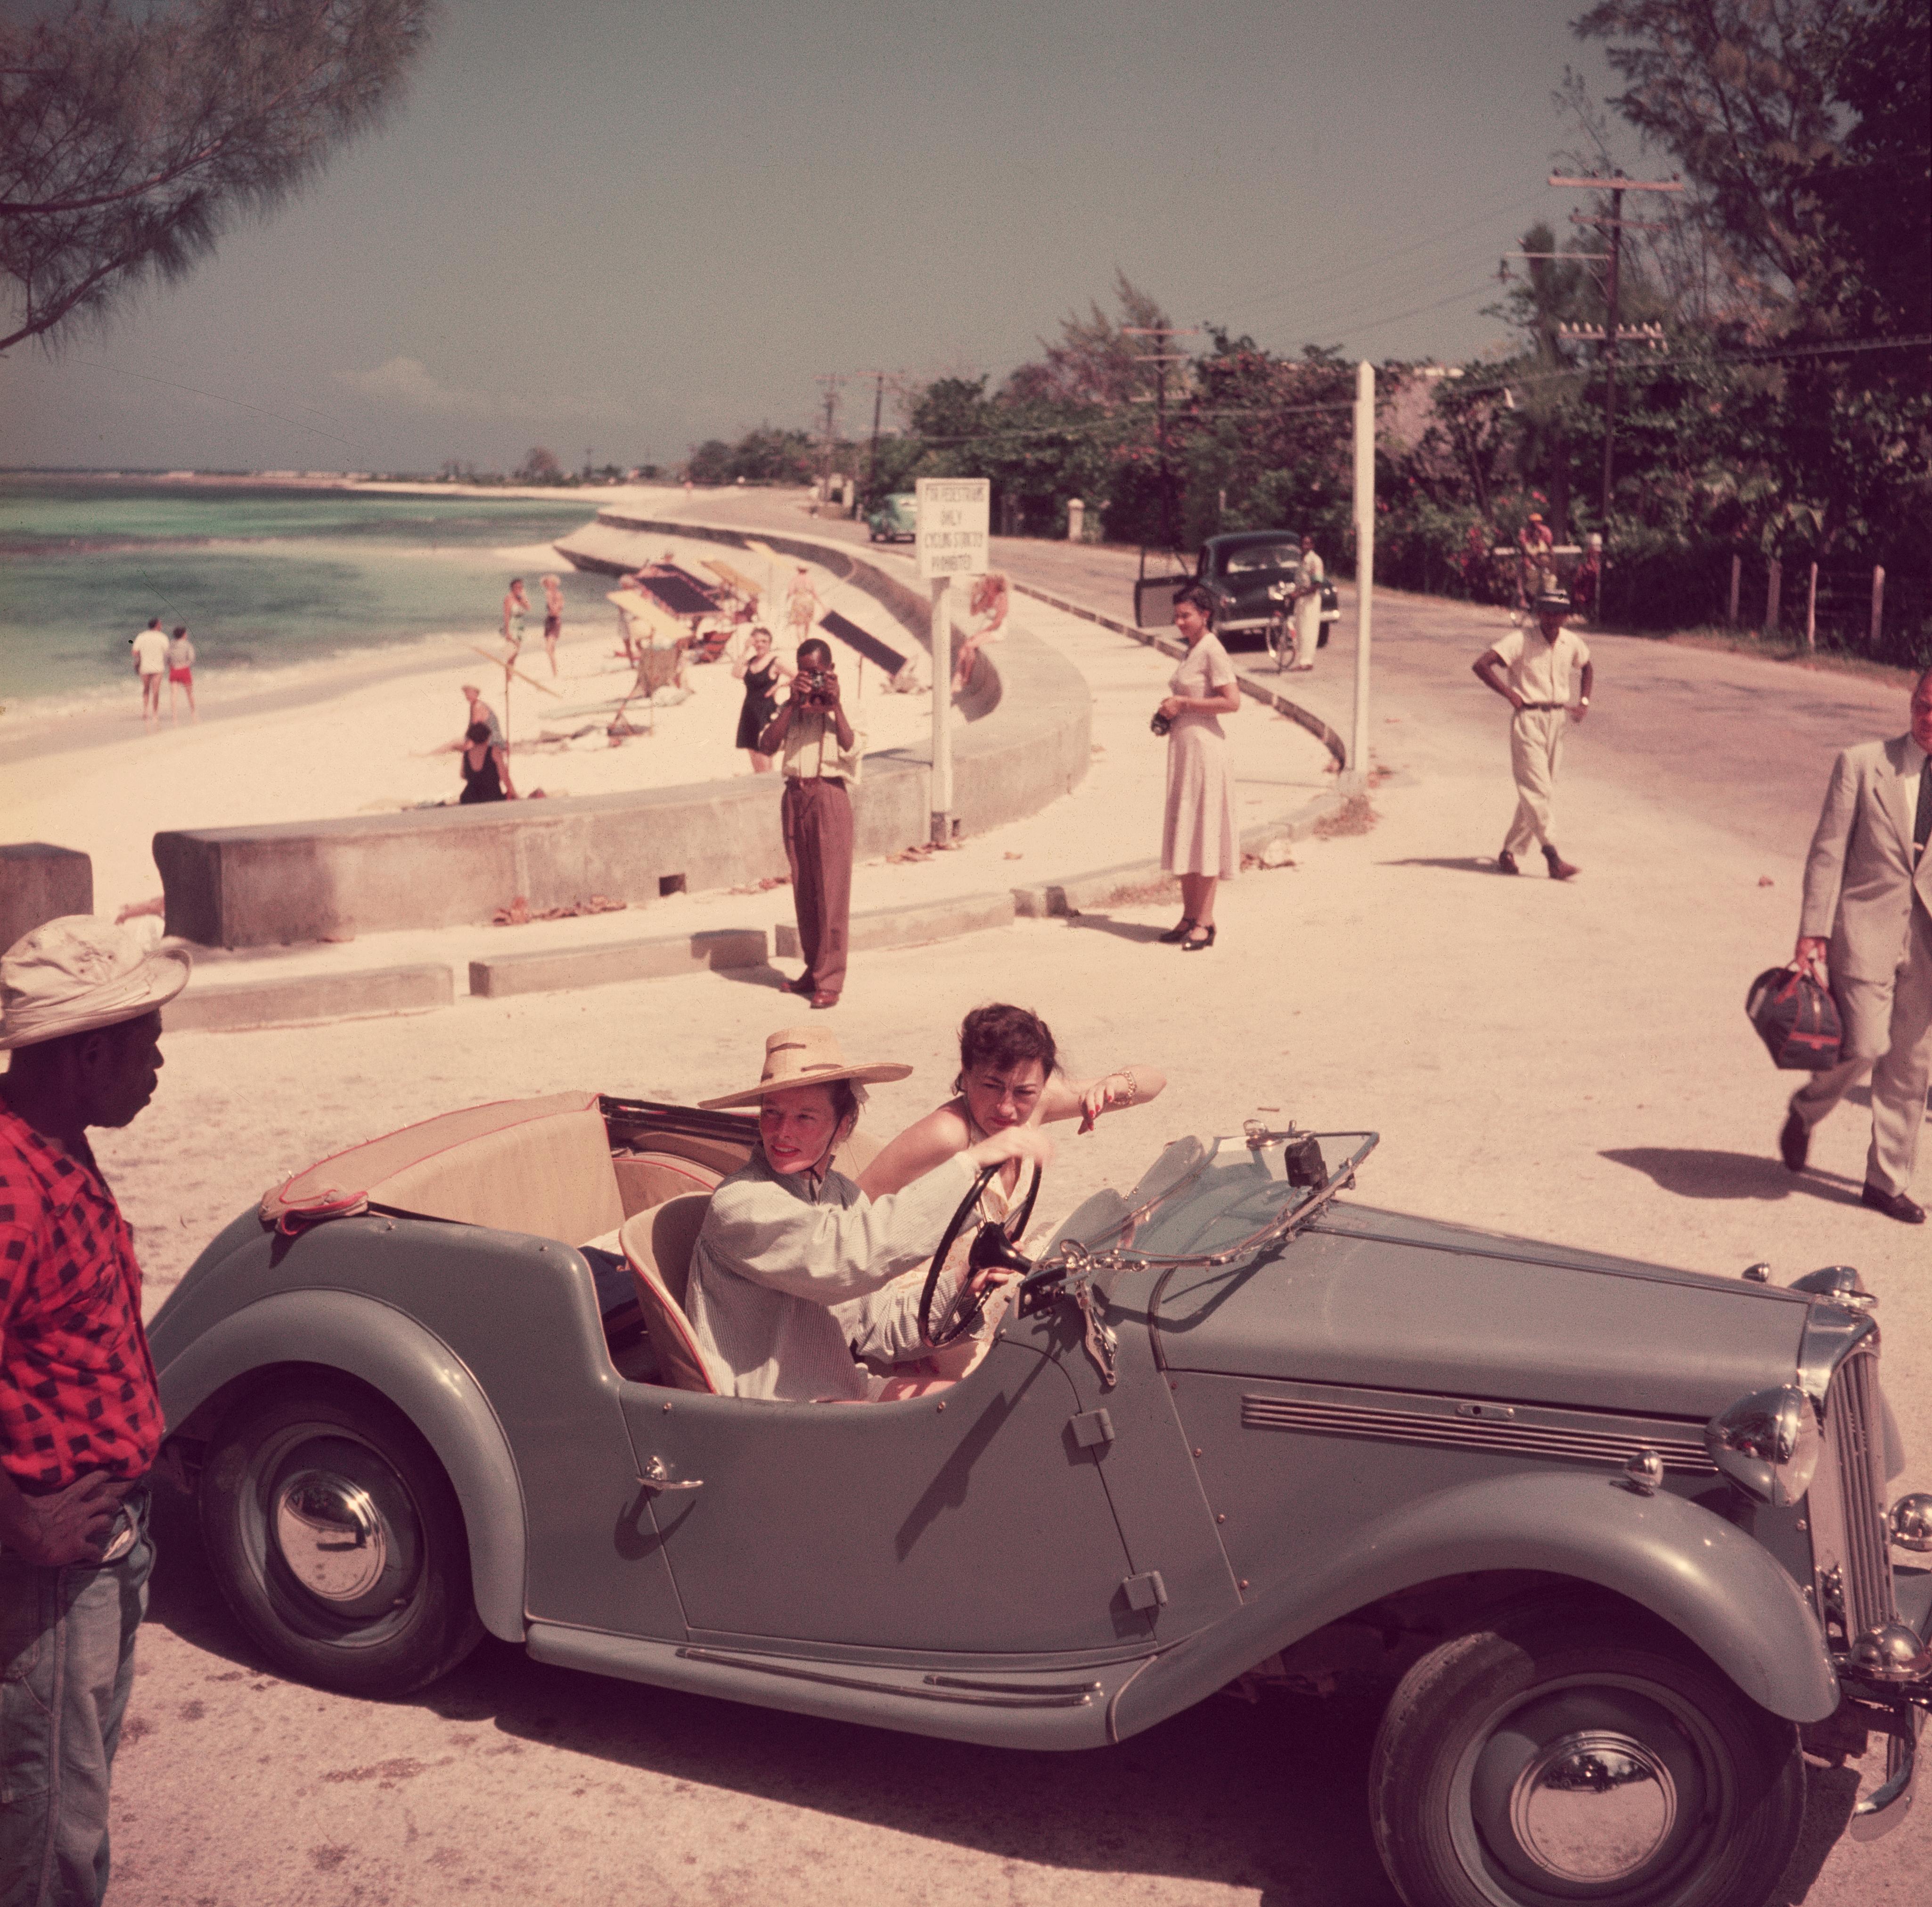 'Katharine Hepburn' 1953 Slim Aarons Limited Estate Edition

1953: American film star Katharine Hepburn (1907 – 2003) driving along the waterfront with Irene Mayer Selznick at Montego Bay, Jamaica. (Photo by Slim Aarons)

C Print
Produced from the